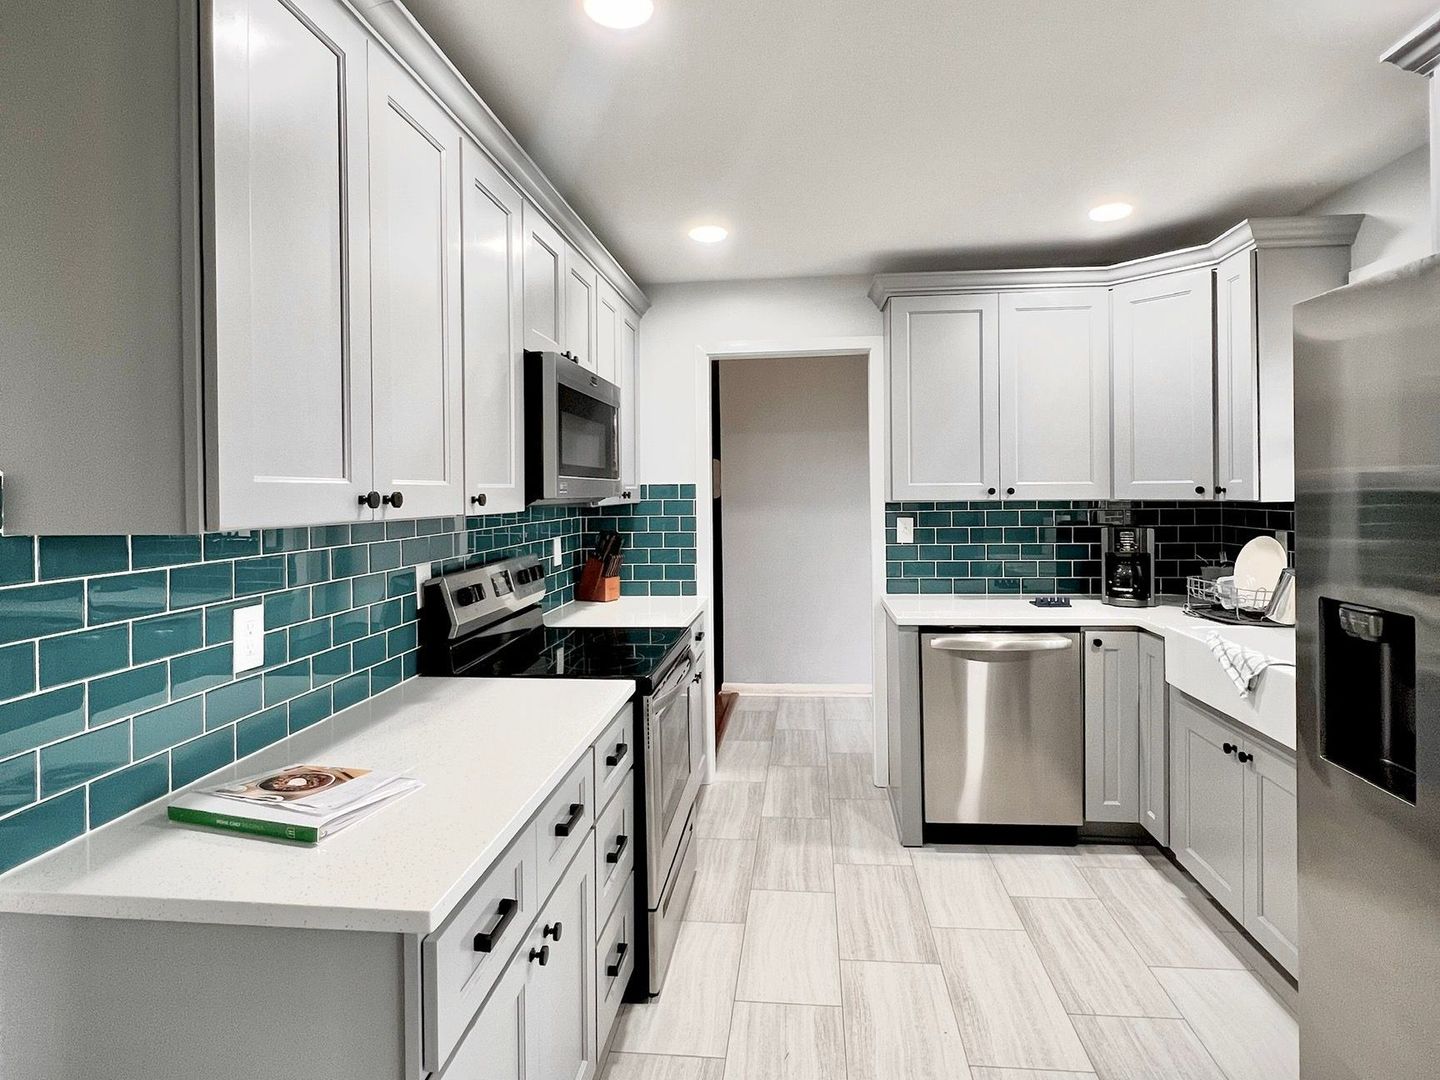 Kitchen Remodeling Contractors - Timonium - MD - White shaker cabinets